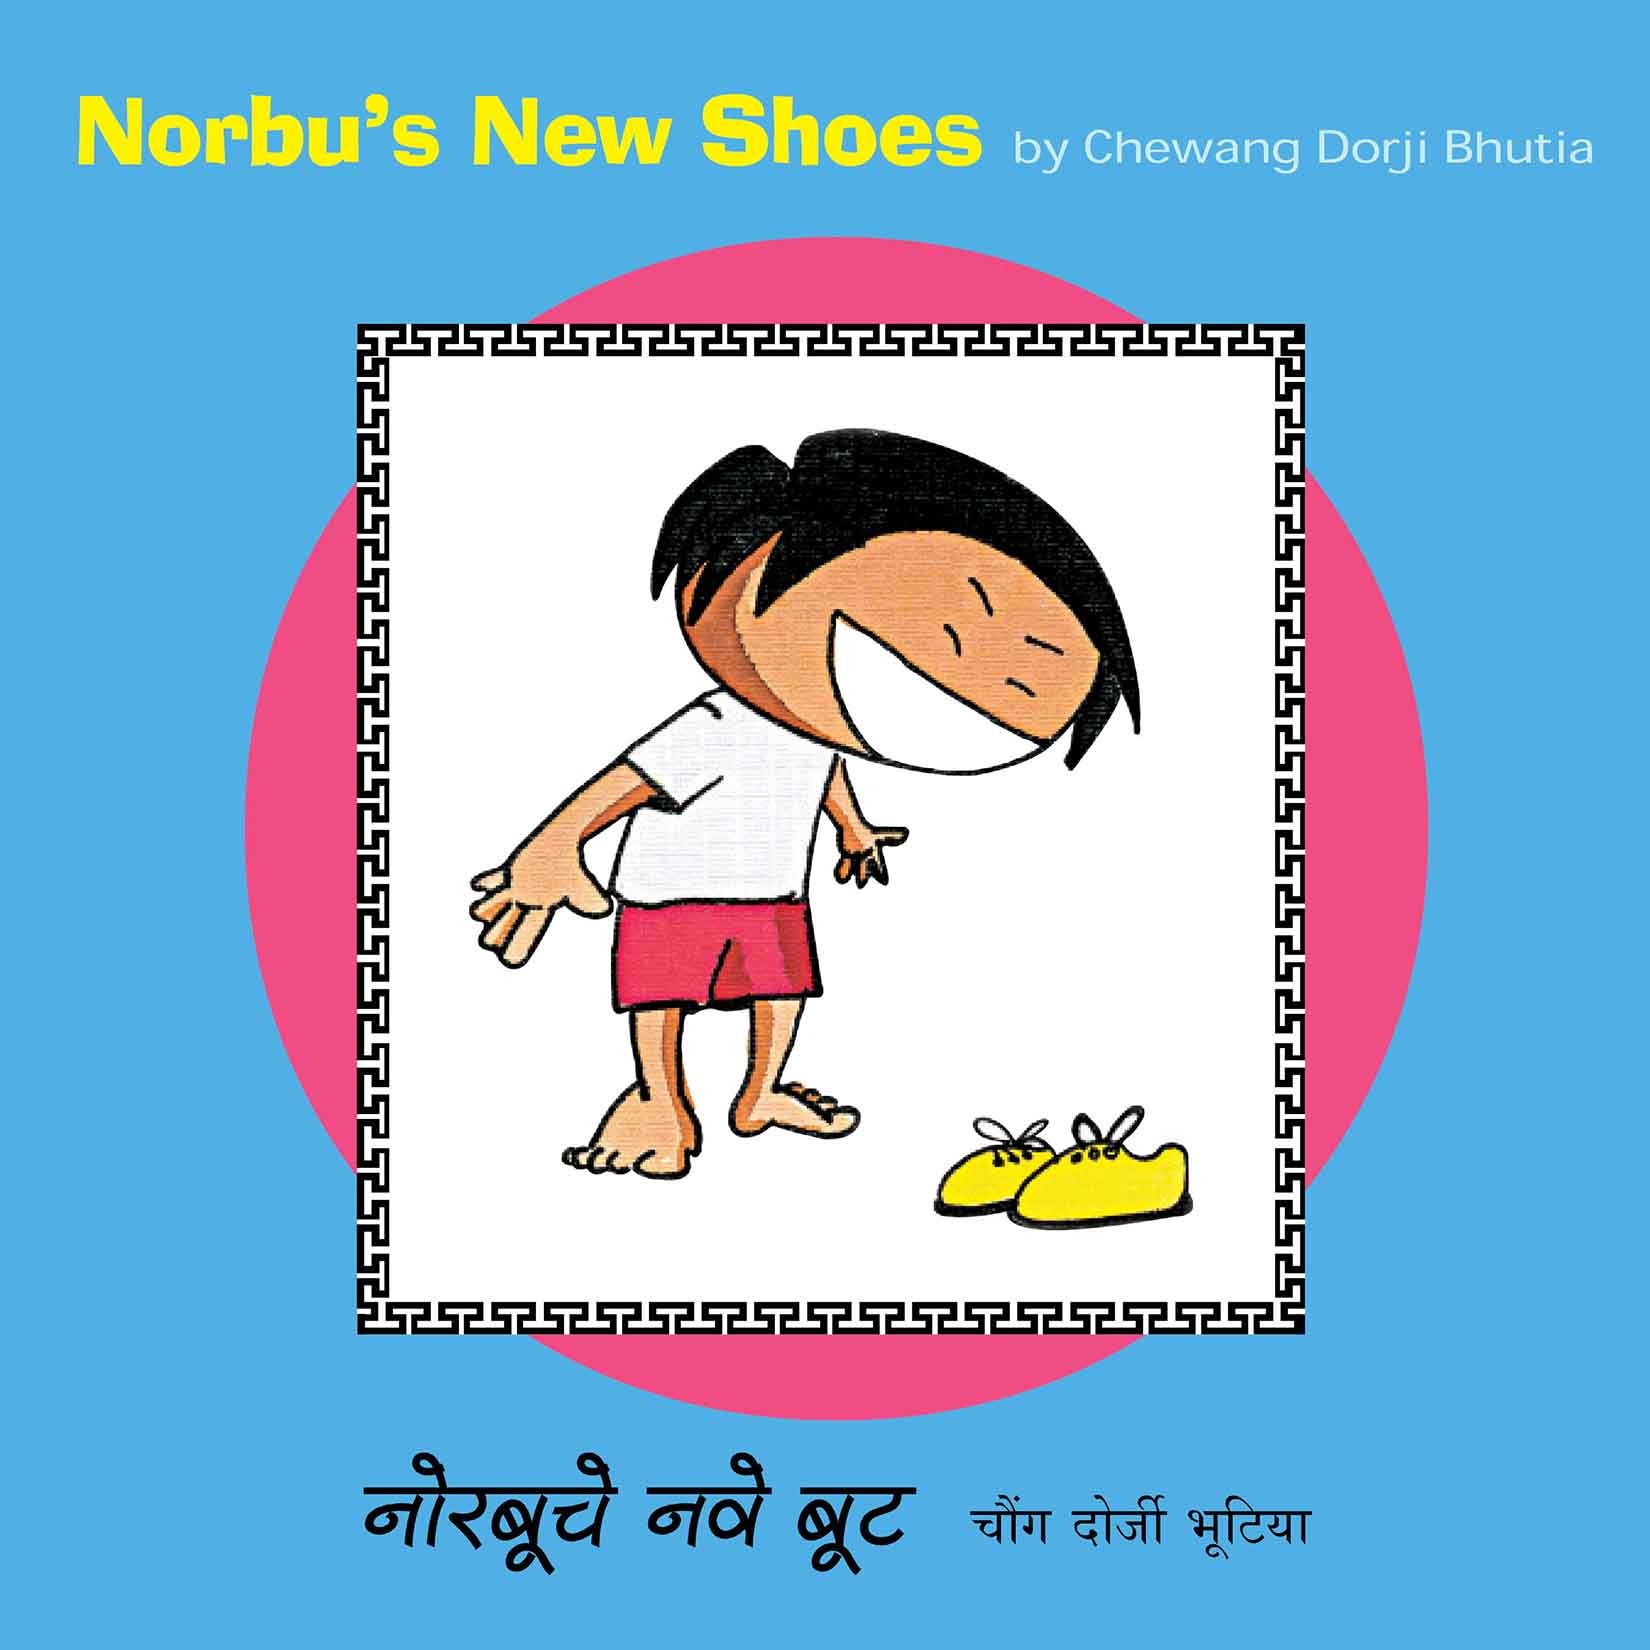 Norbu's New Shoes/Norbuche Nave Boot (English-Marathi)